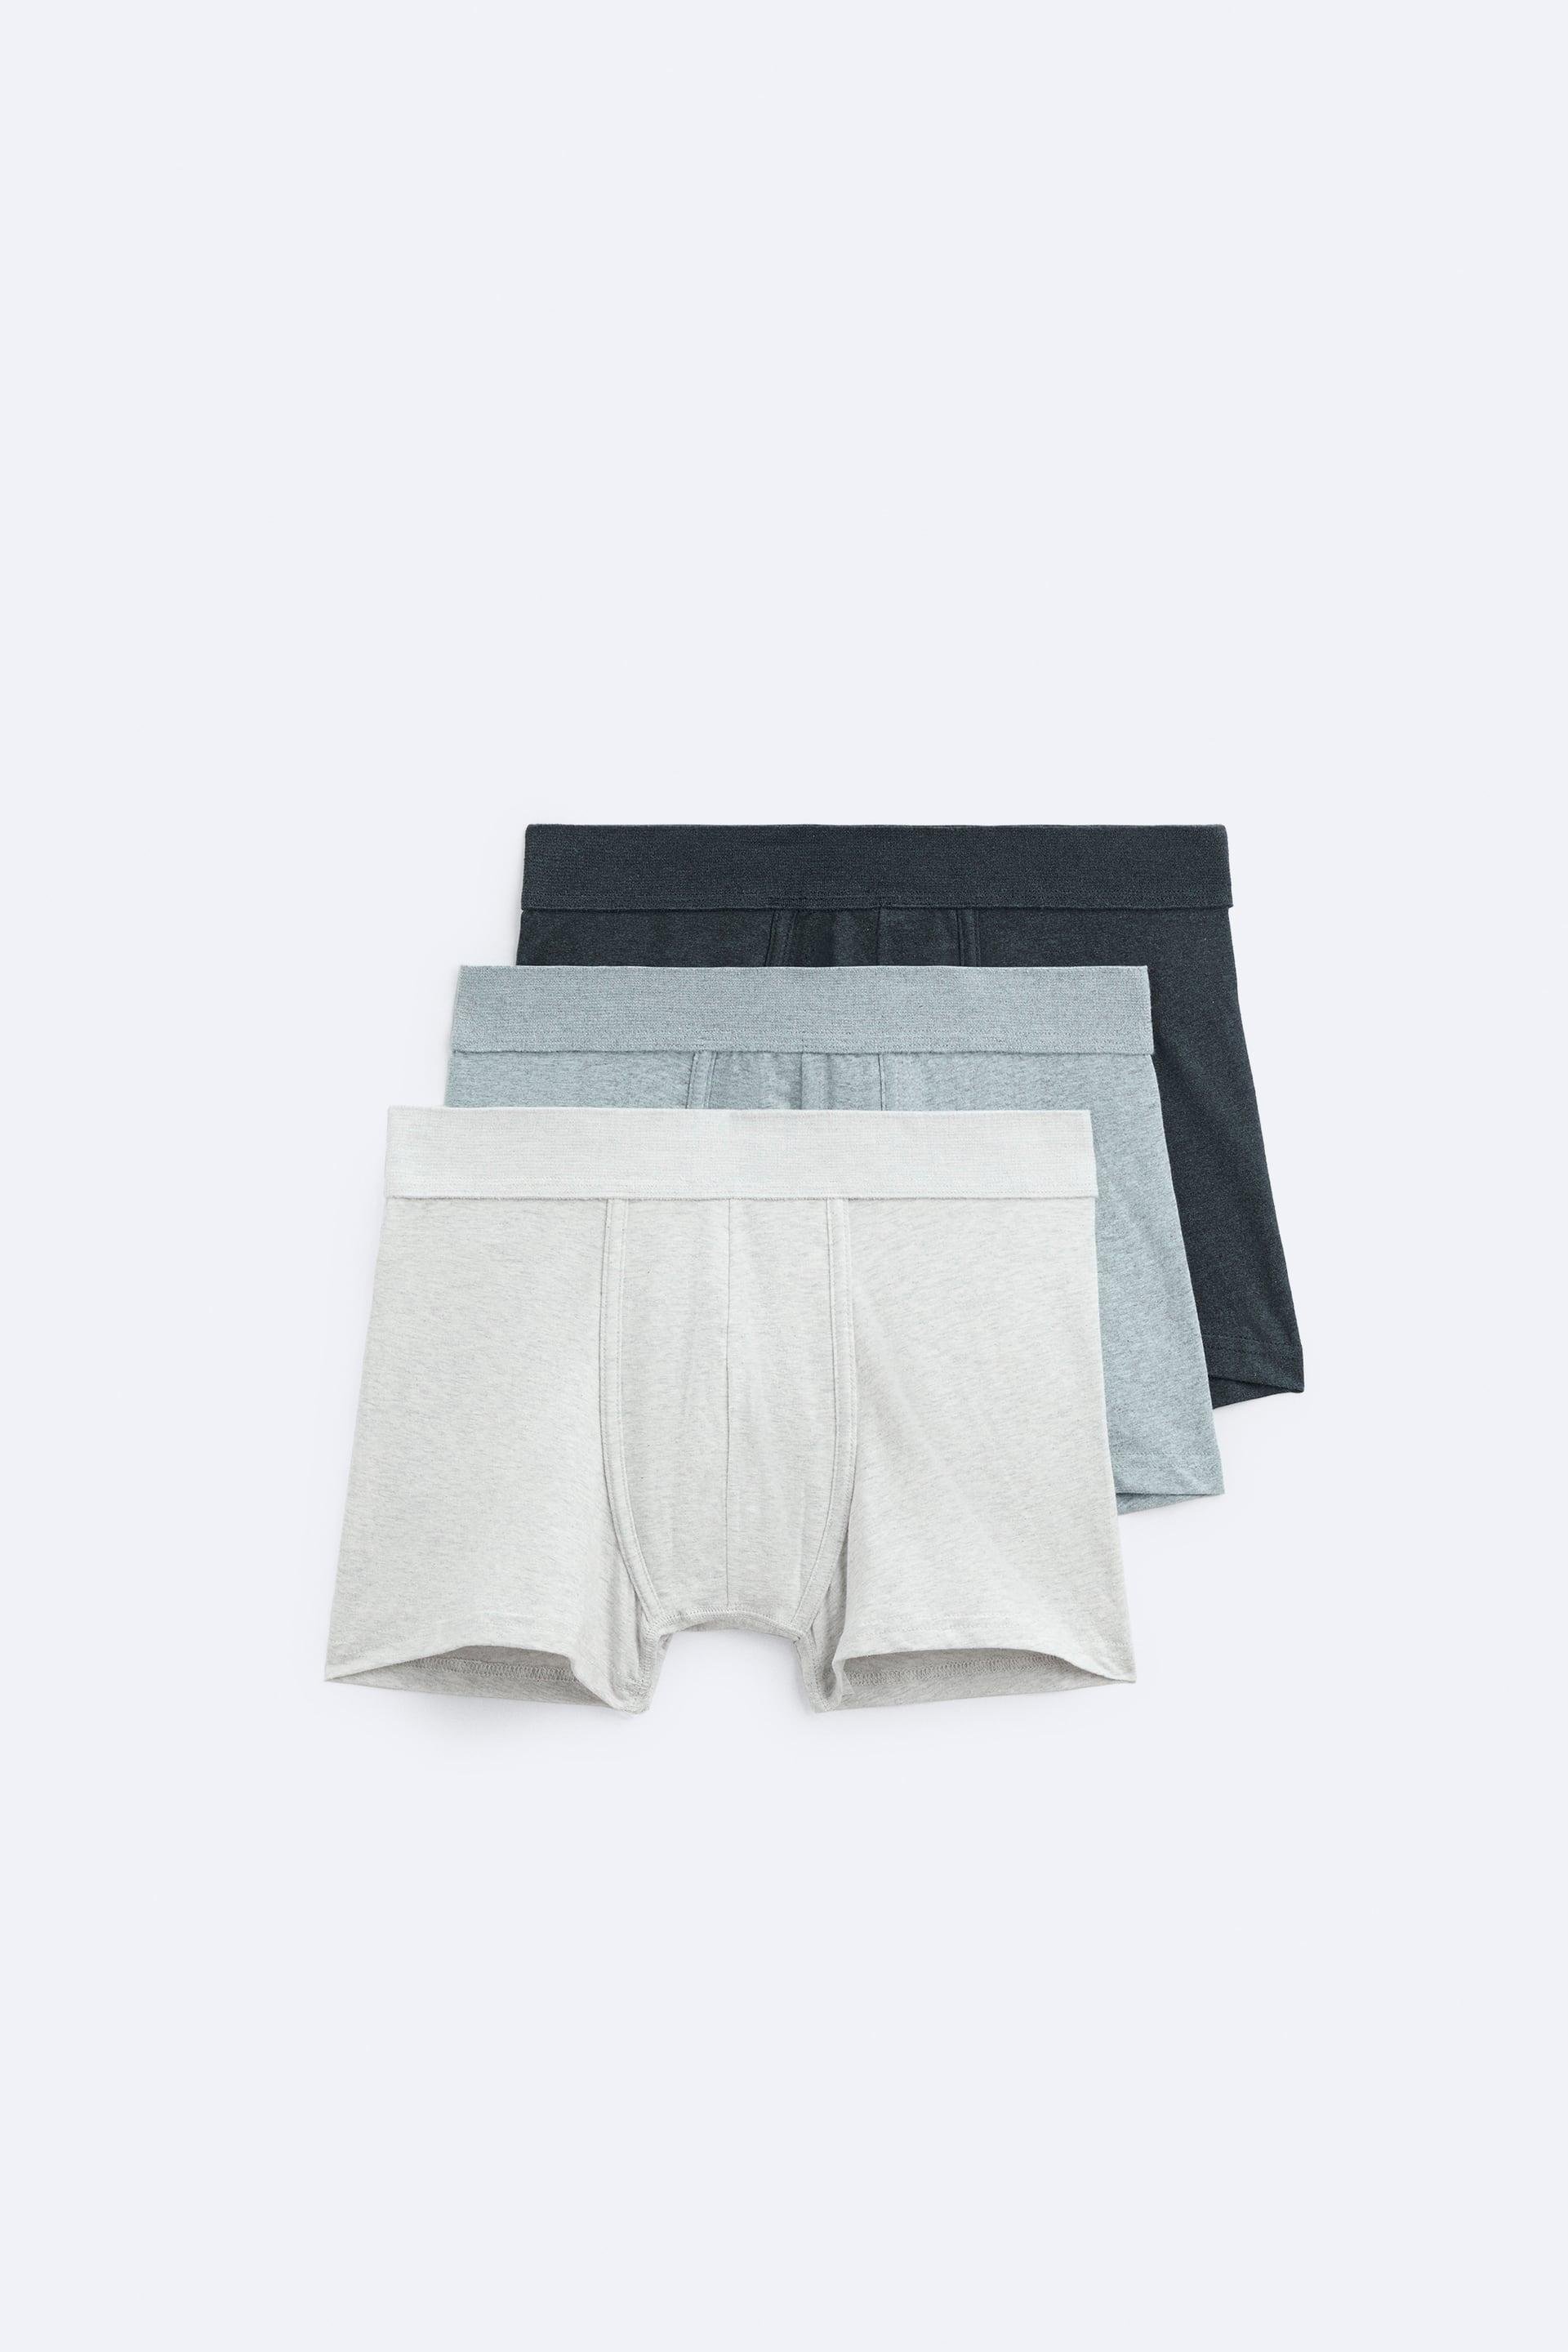 3 PACK OF COMBINATION BOXERS by ZARA